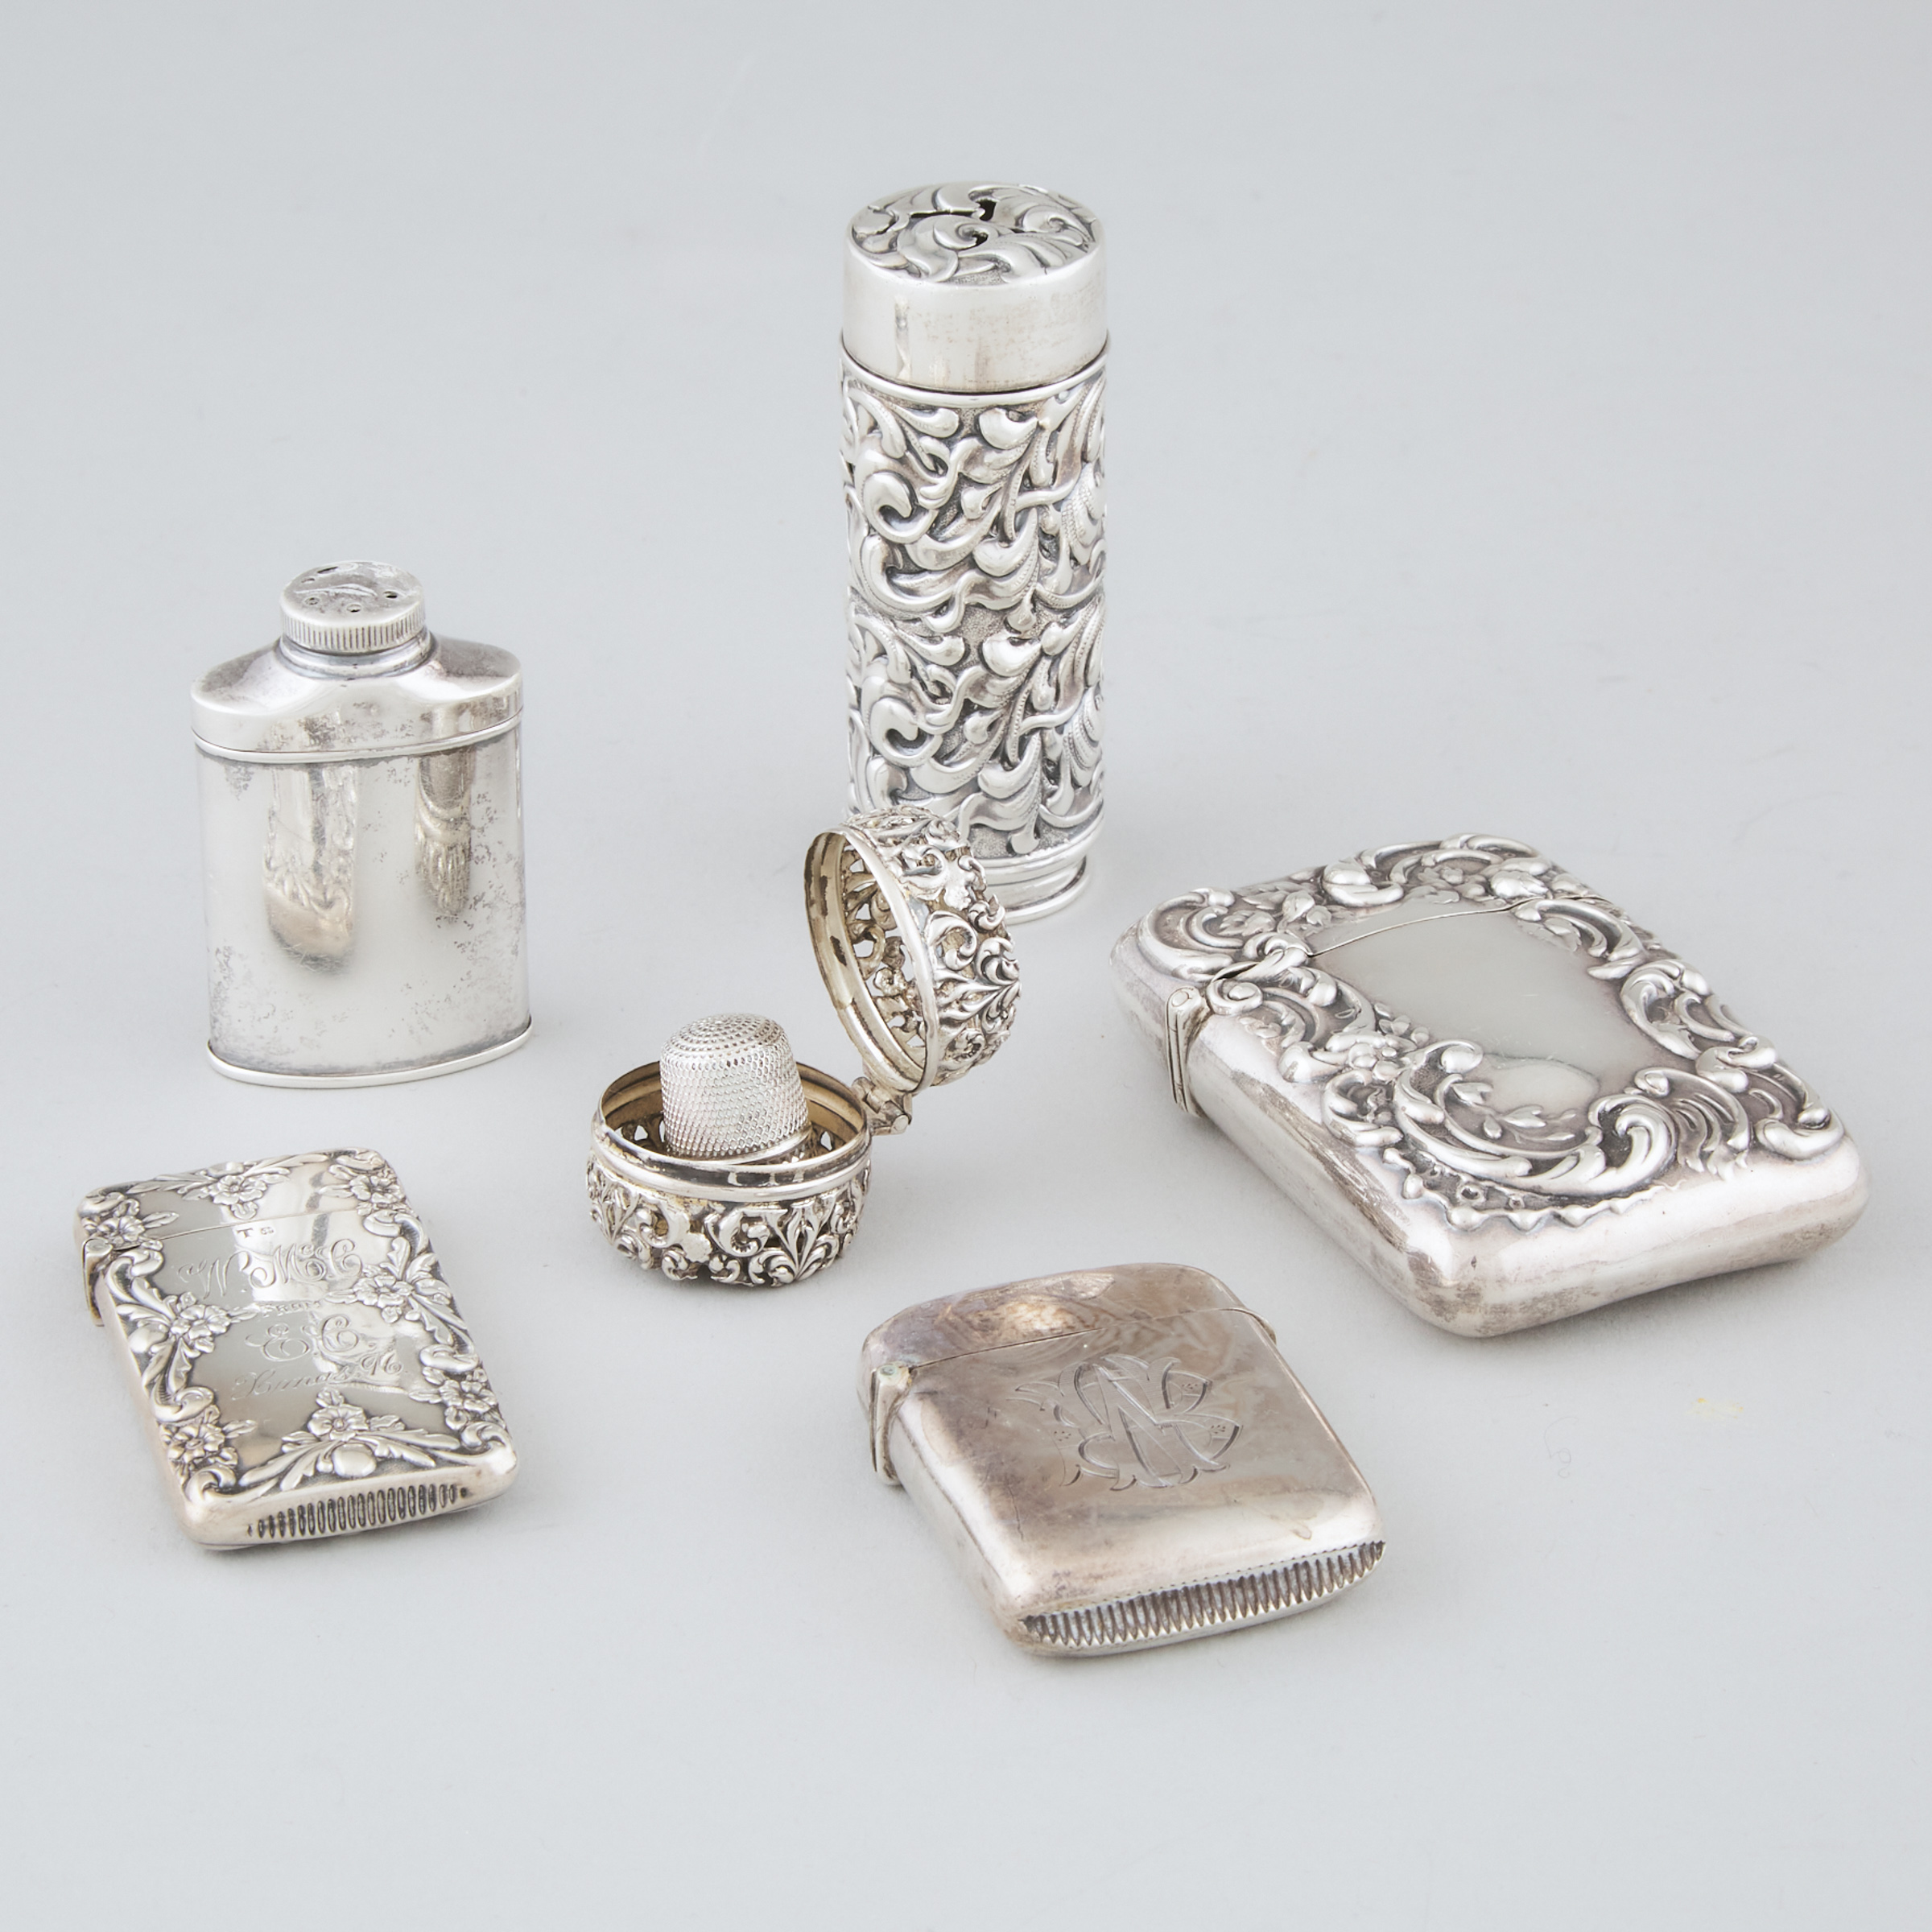 Two English and American Silver Vesta Cases, a Card Case, Thimble Case, and Two Casters, late 19th/early 20th century